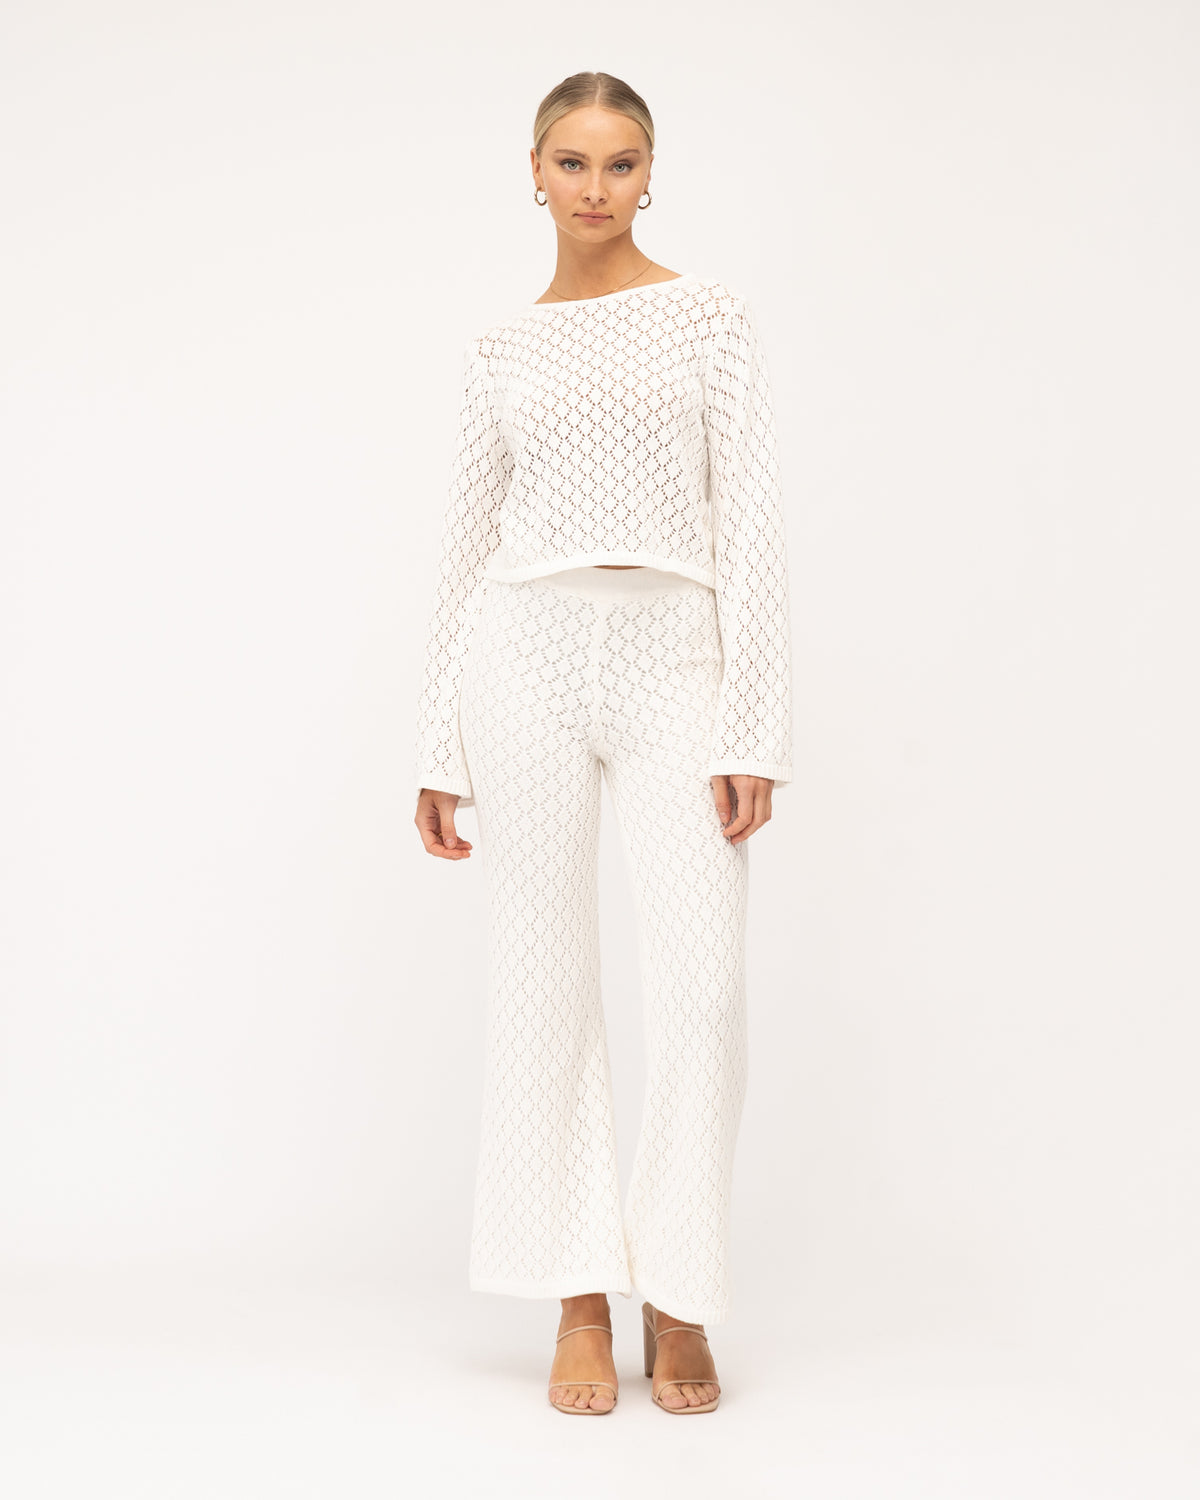 A model is at the beach wearing a white long-sleeve crochet top and pants from the Paper Heart collection designed by Global Fashion House.